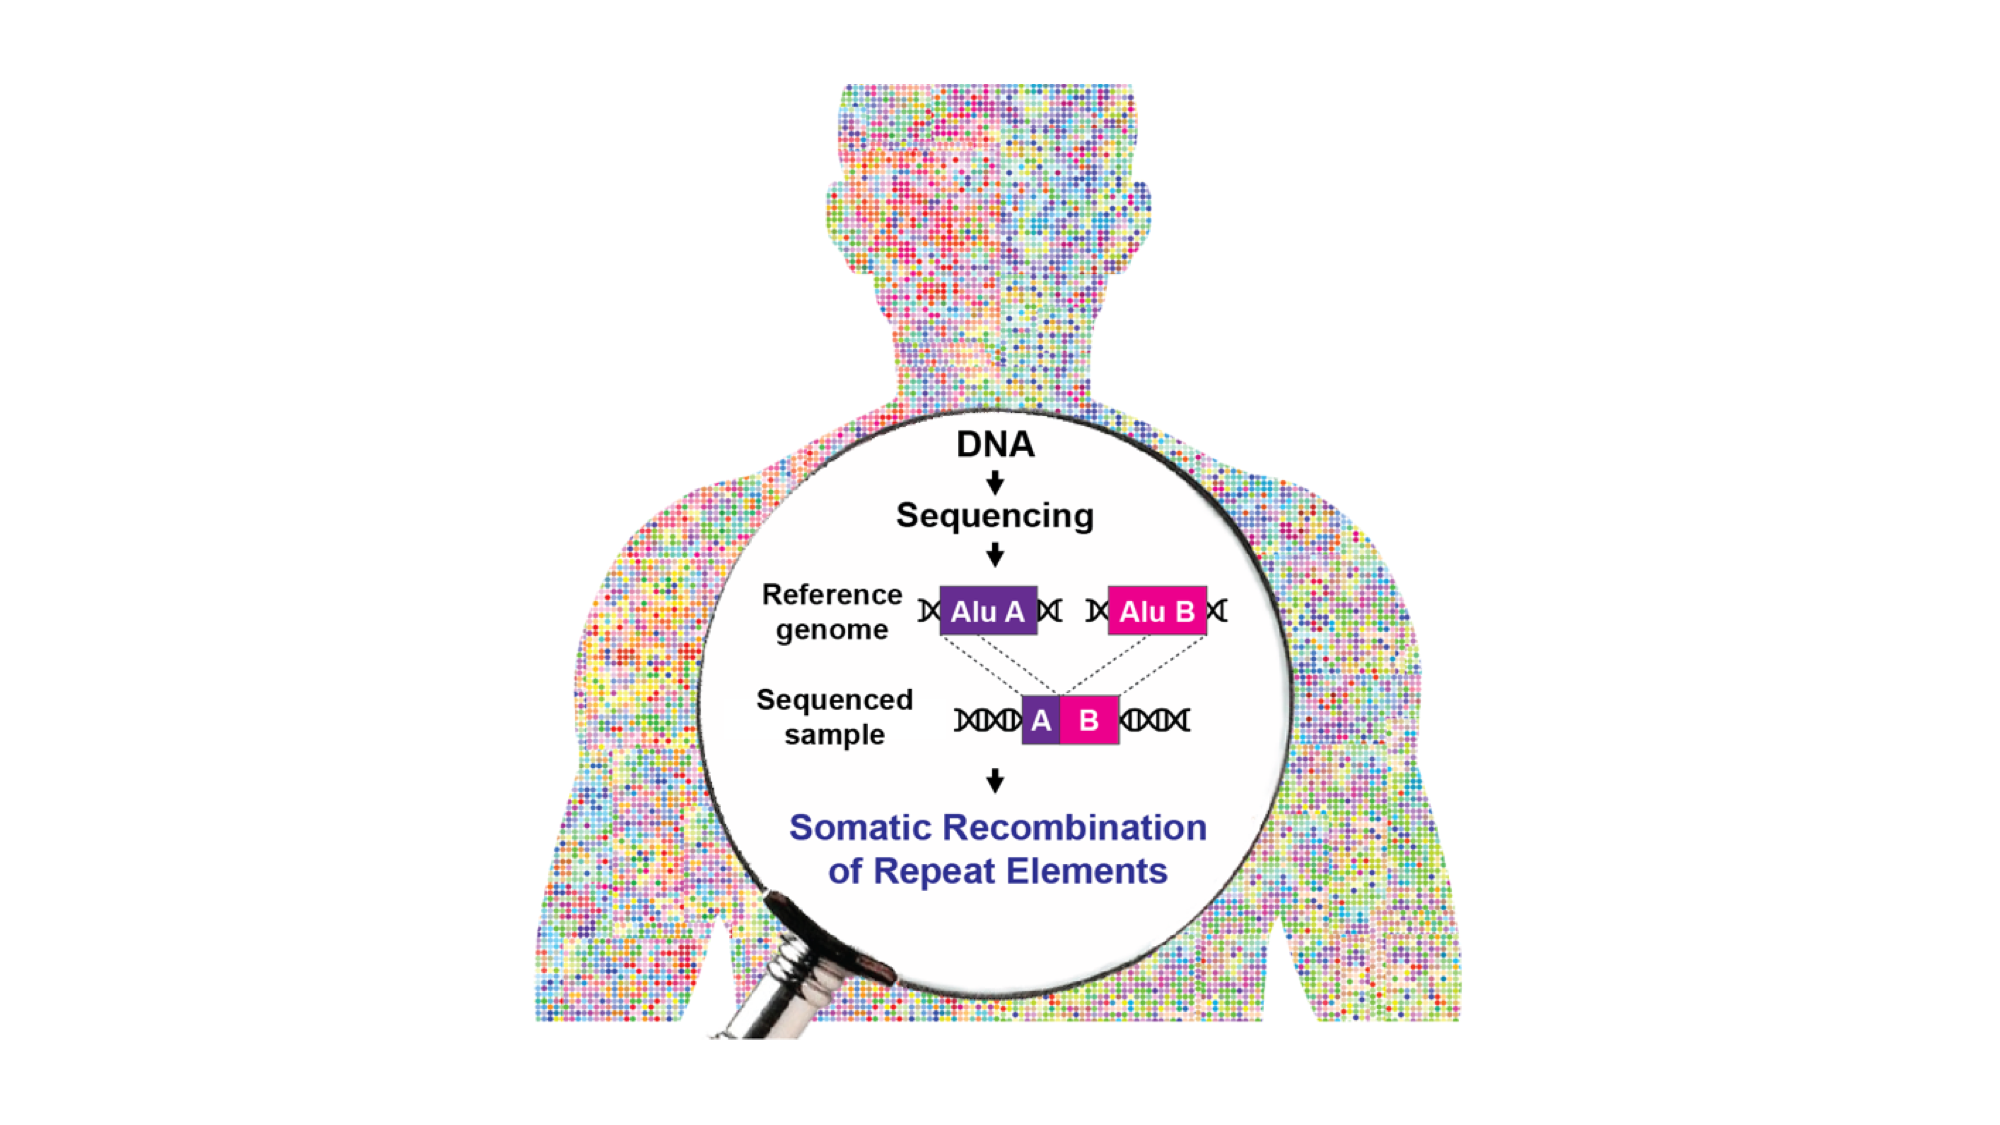 A new approach to investigate the impact of retrotransposon recombination on human genome